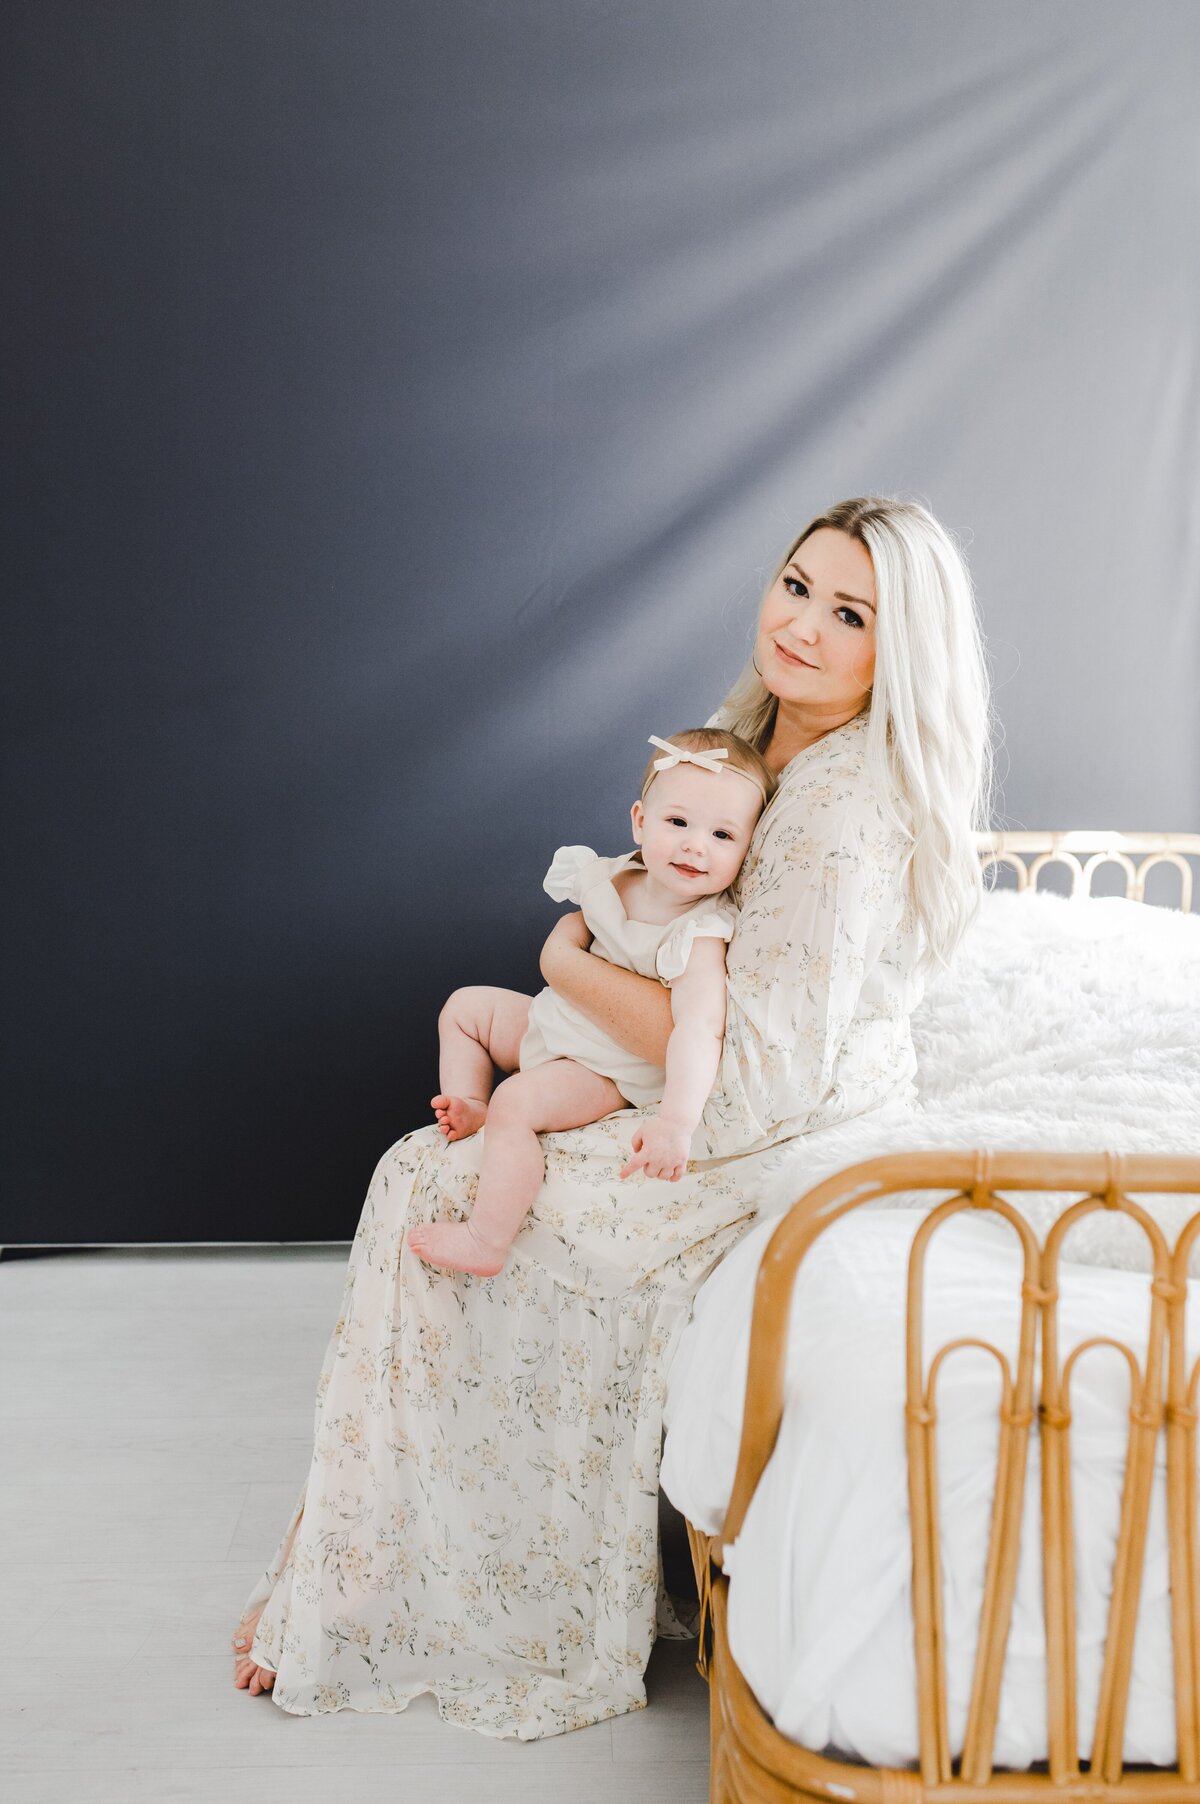 Mommy and baby girl sitting on a bed in a studio.